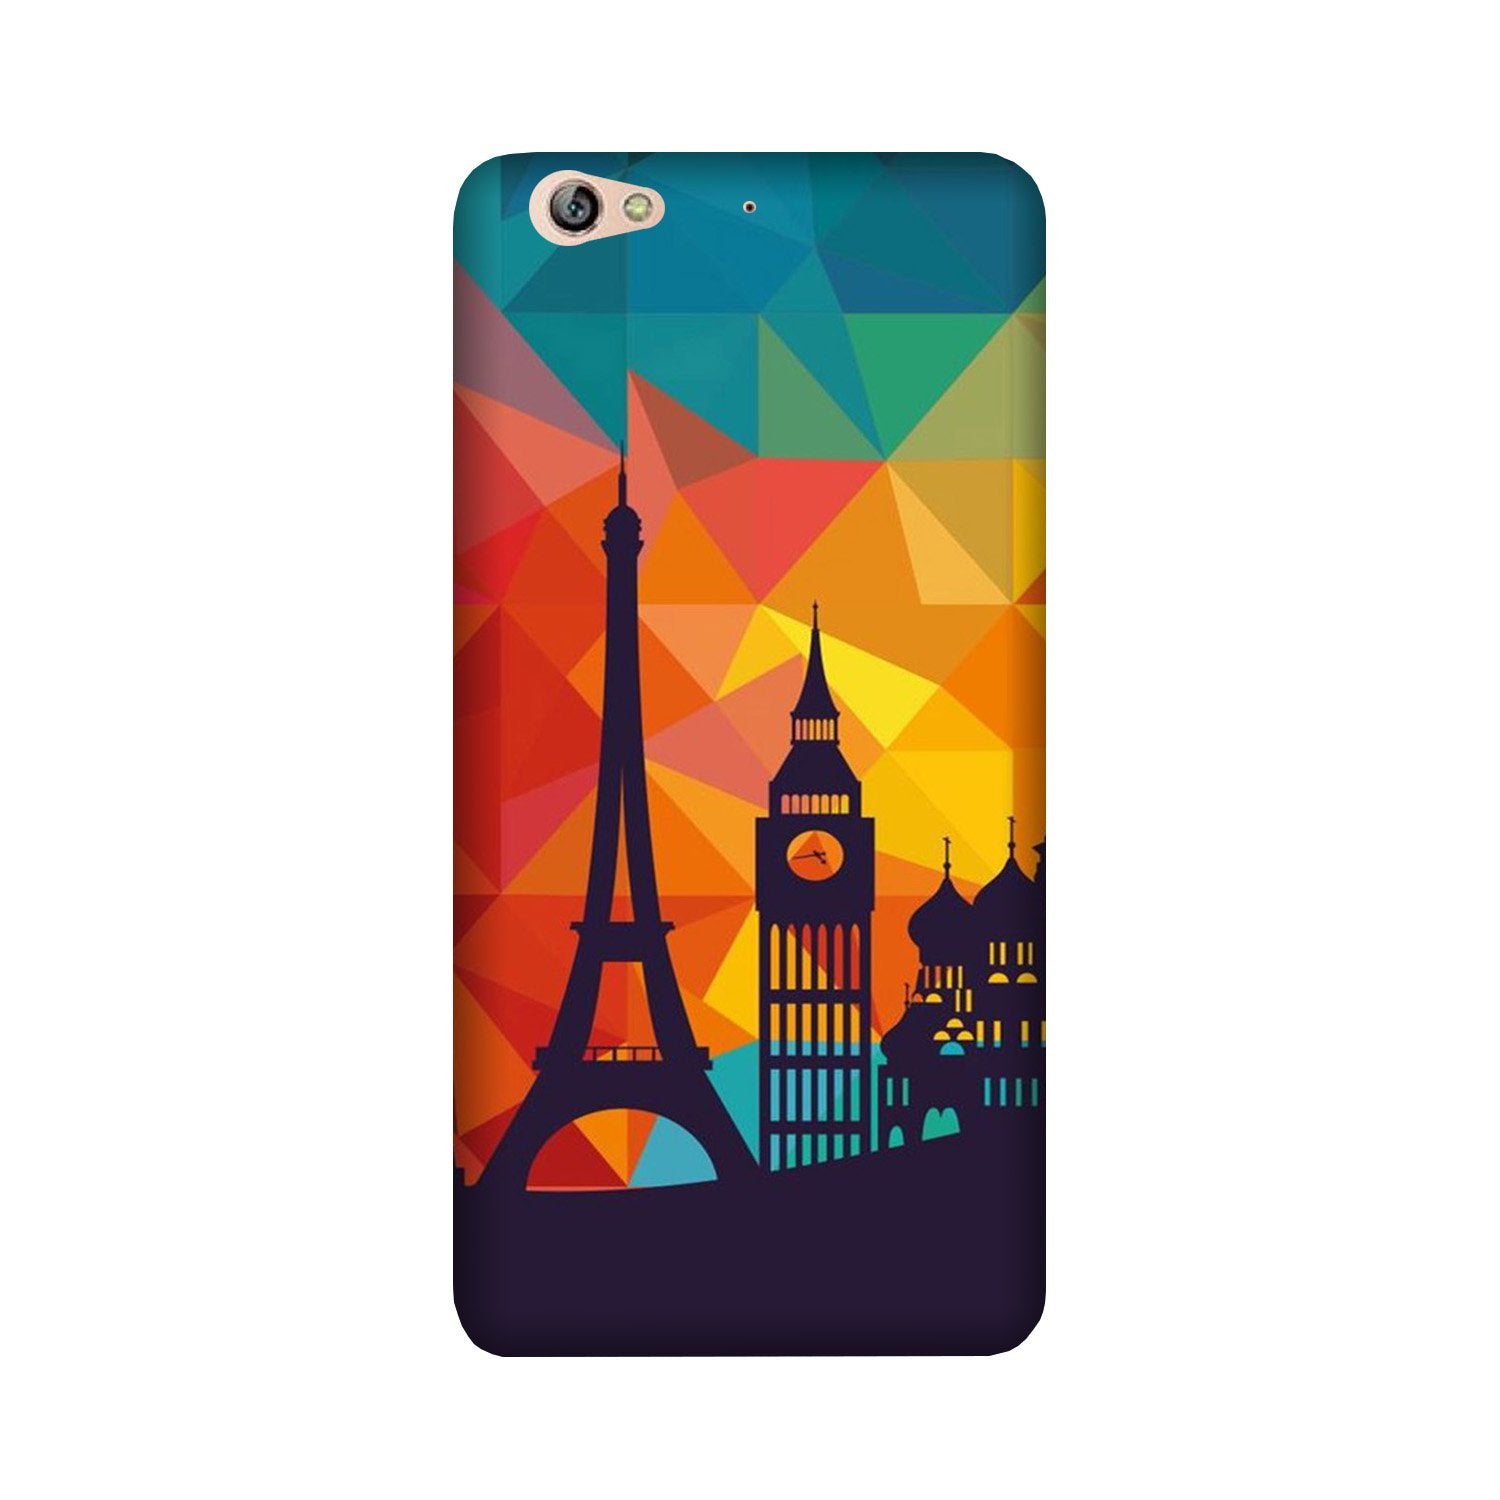 Eiffel Tower2 Case for Gionee S6